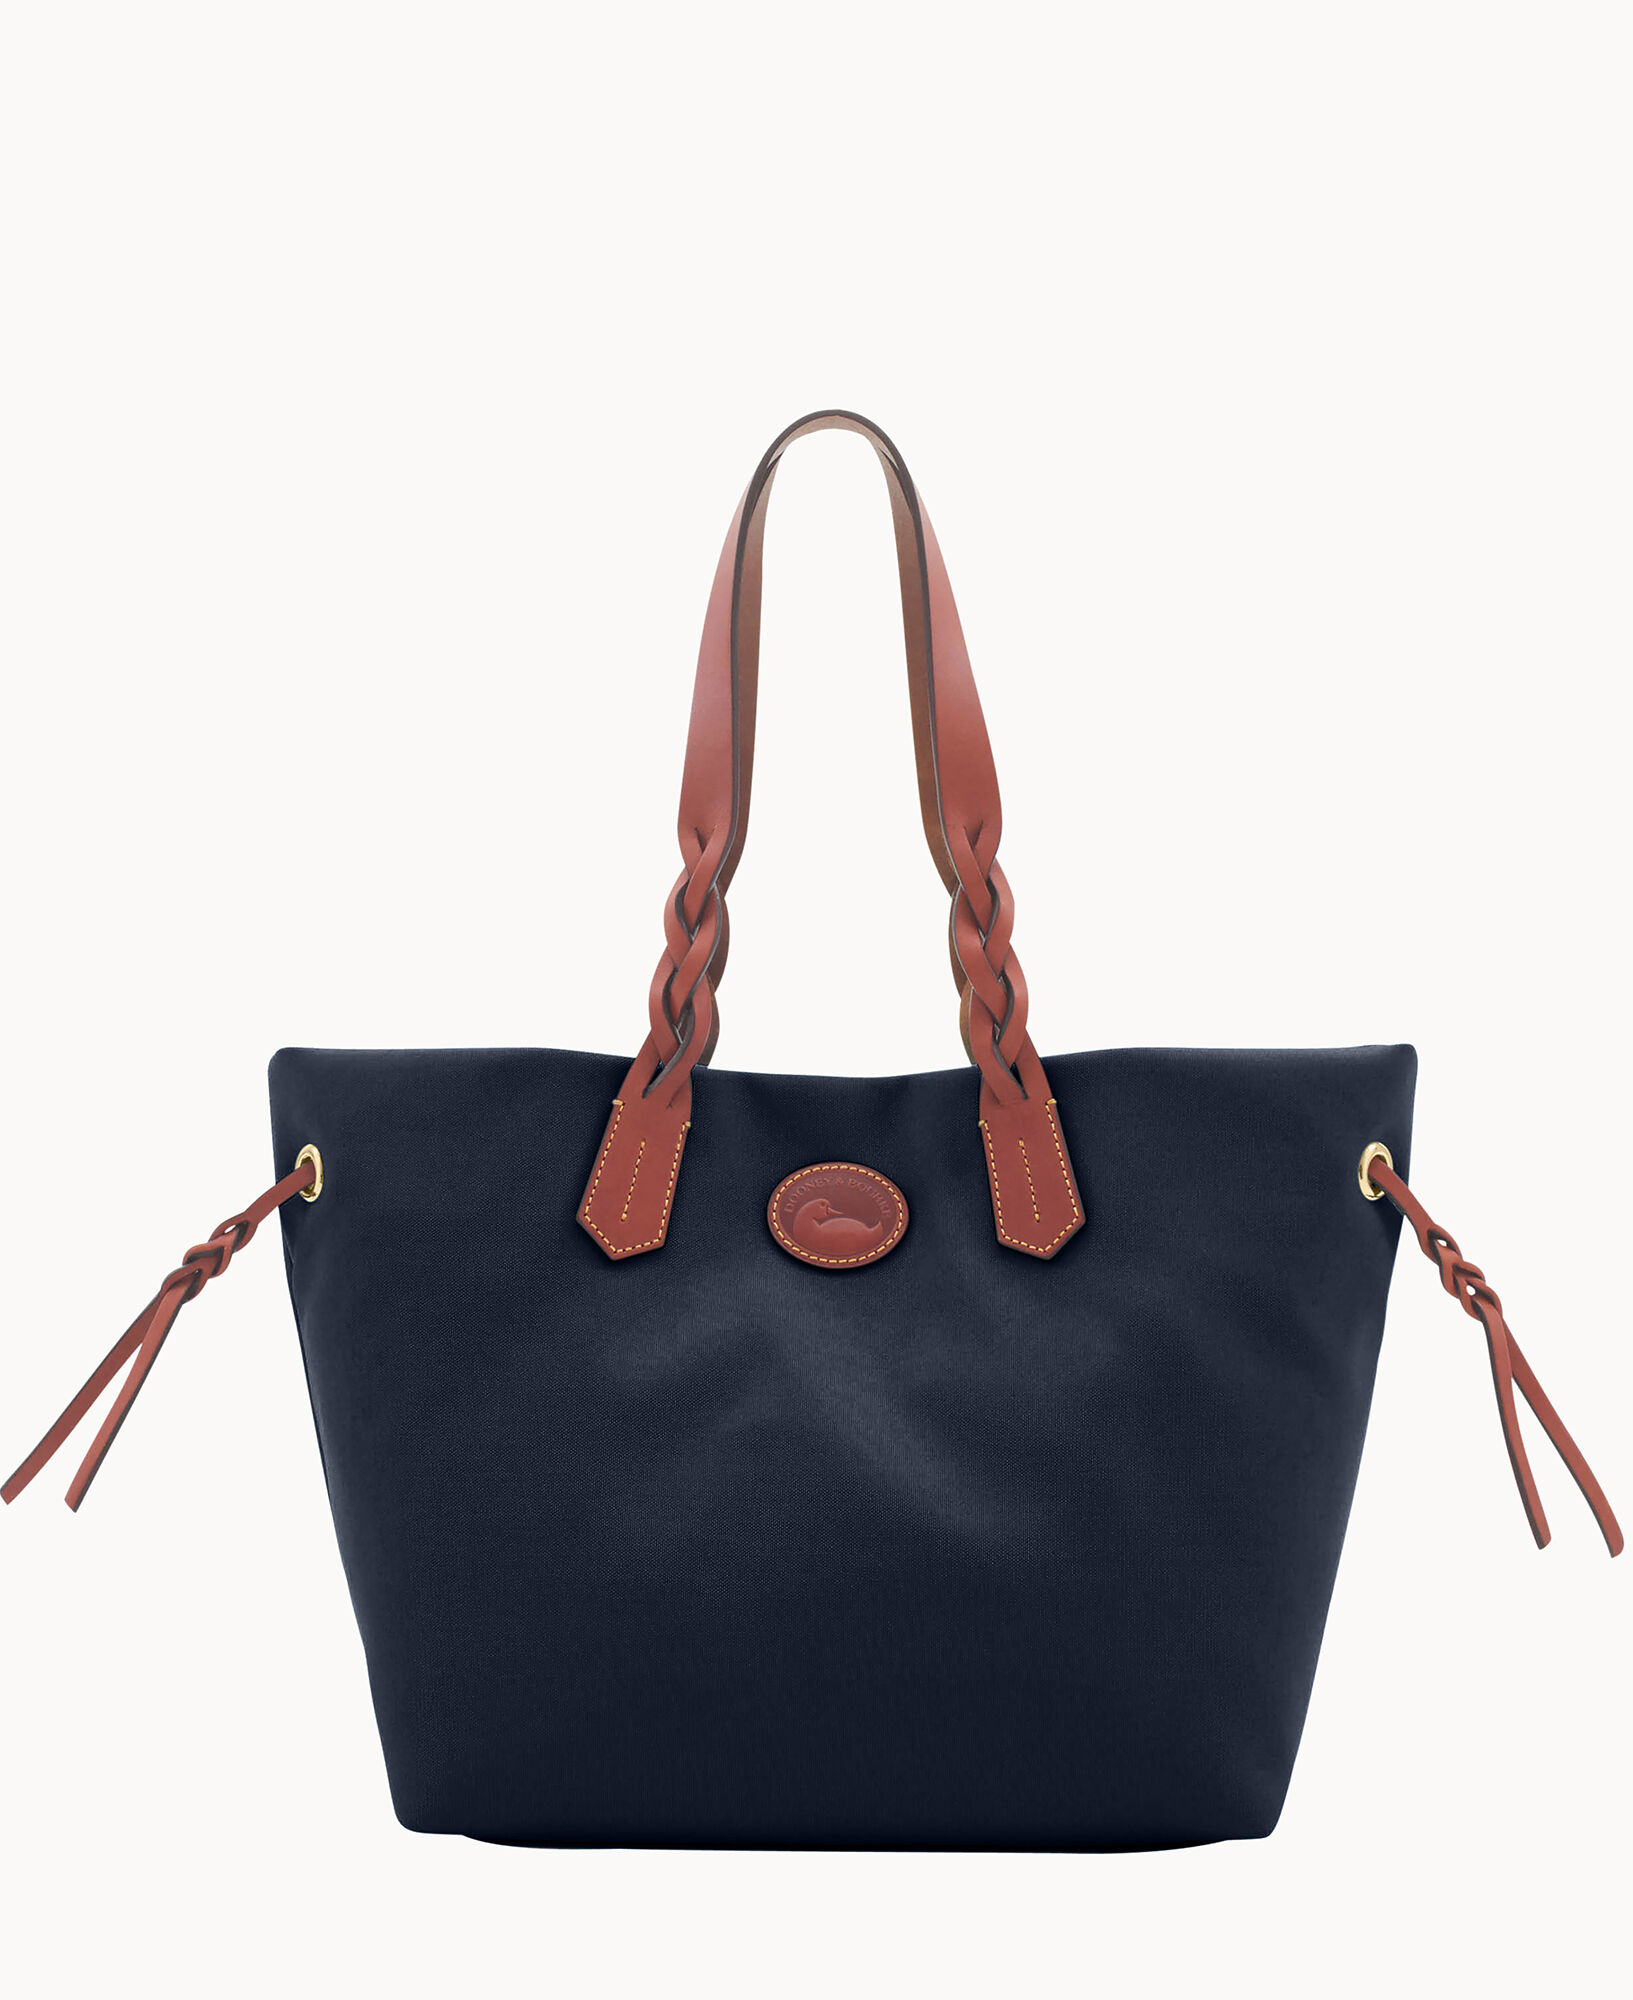 Auth Dooney And Bourke Nylon East West Shopper Tote Bag Navy Blue